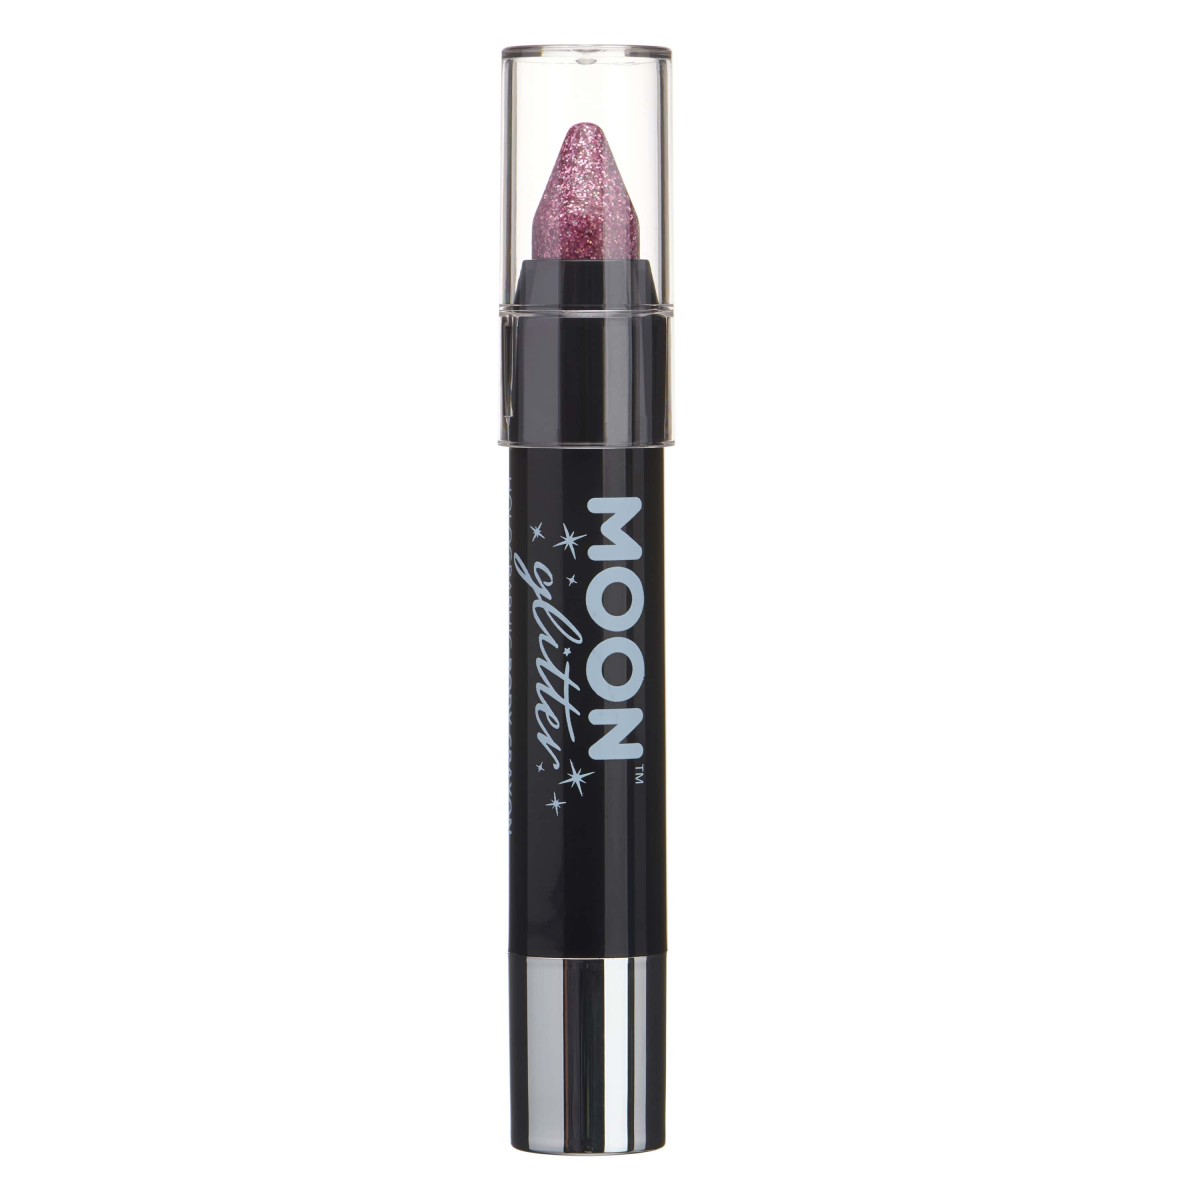 MOON CREATIONS G2 HOLOGRAPHIC GLITTER FACE & BODY CRAYON PINK 3.2g